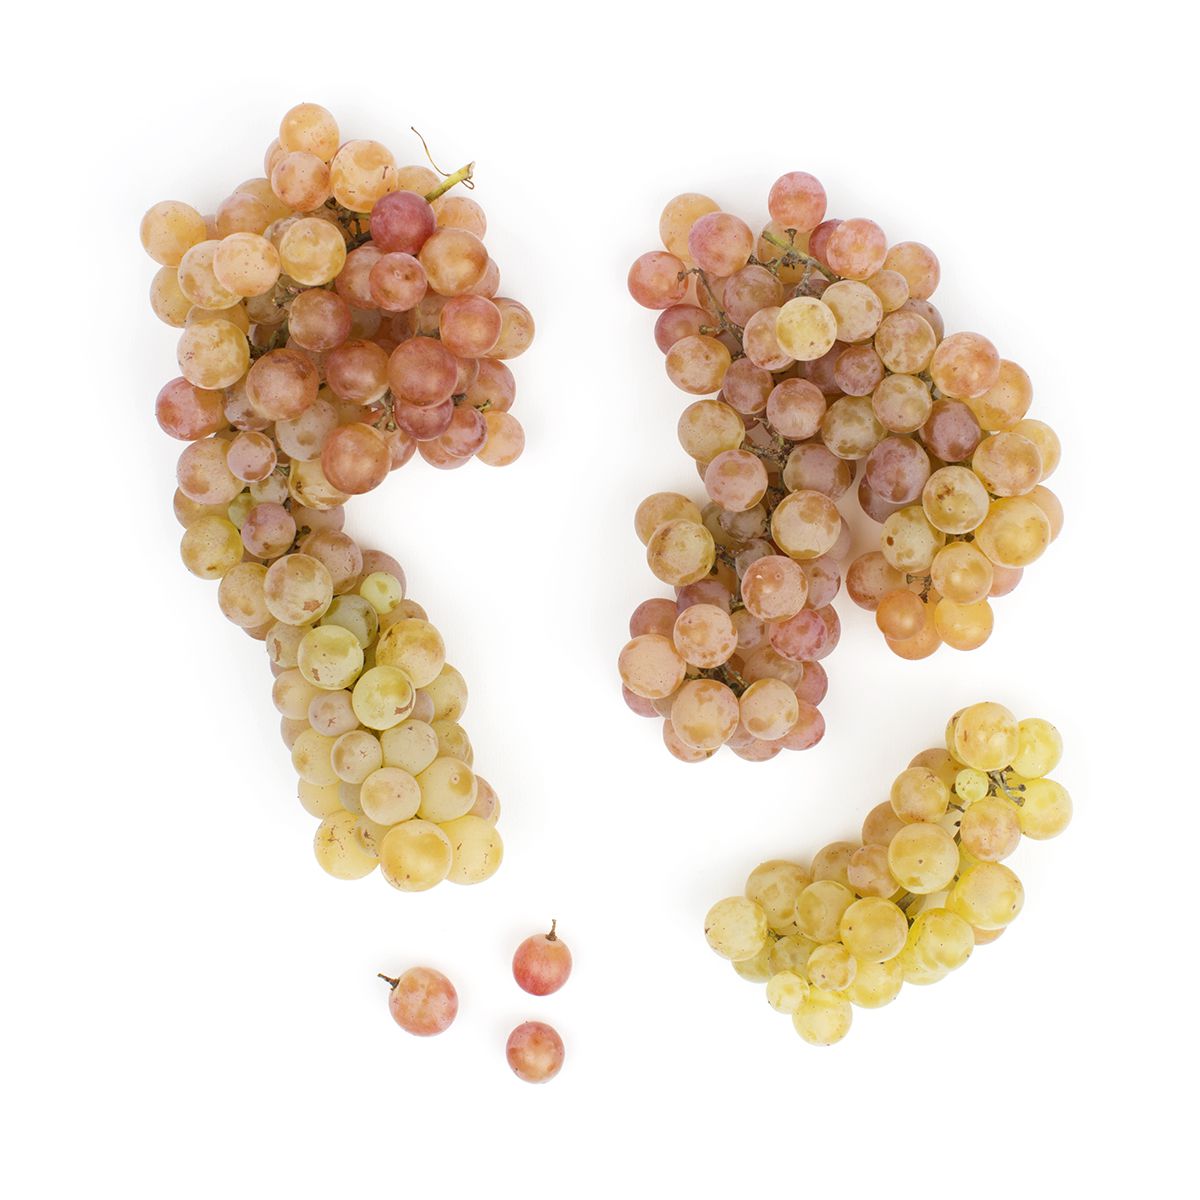 BoxNCase Seedless Pink Muscat Grapes